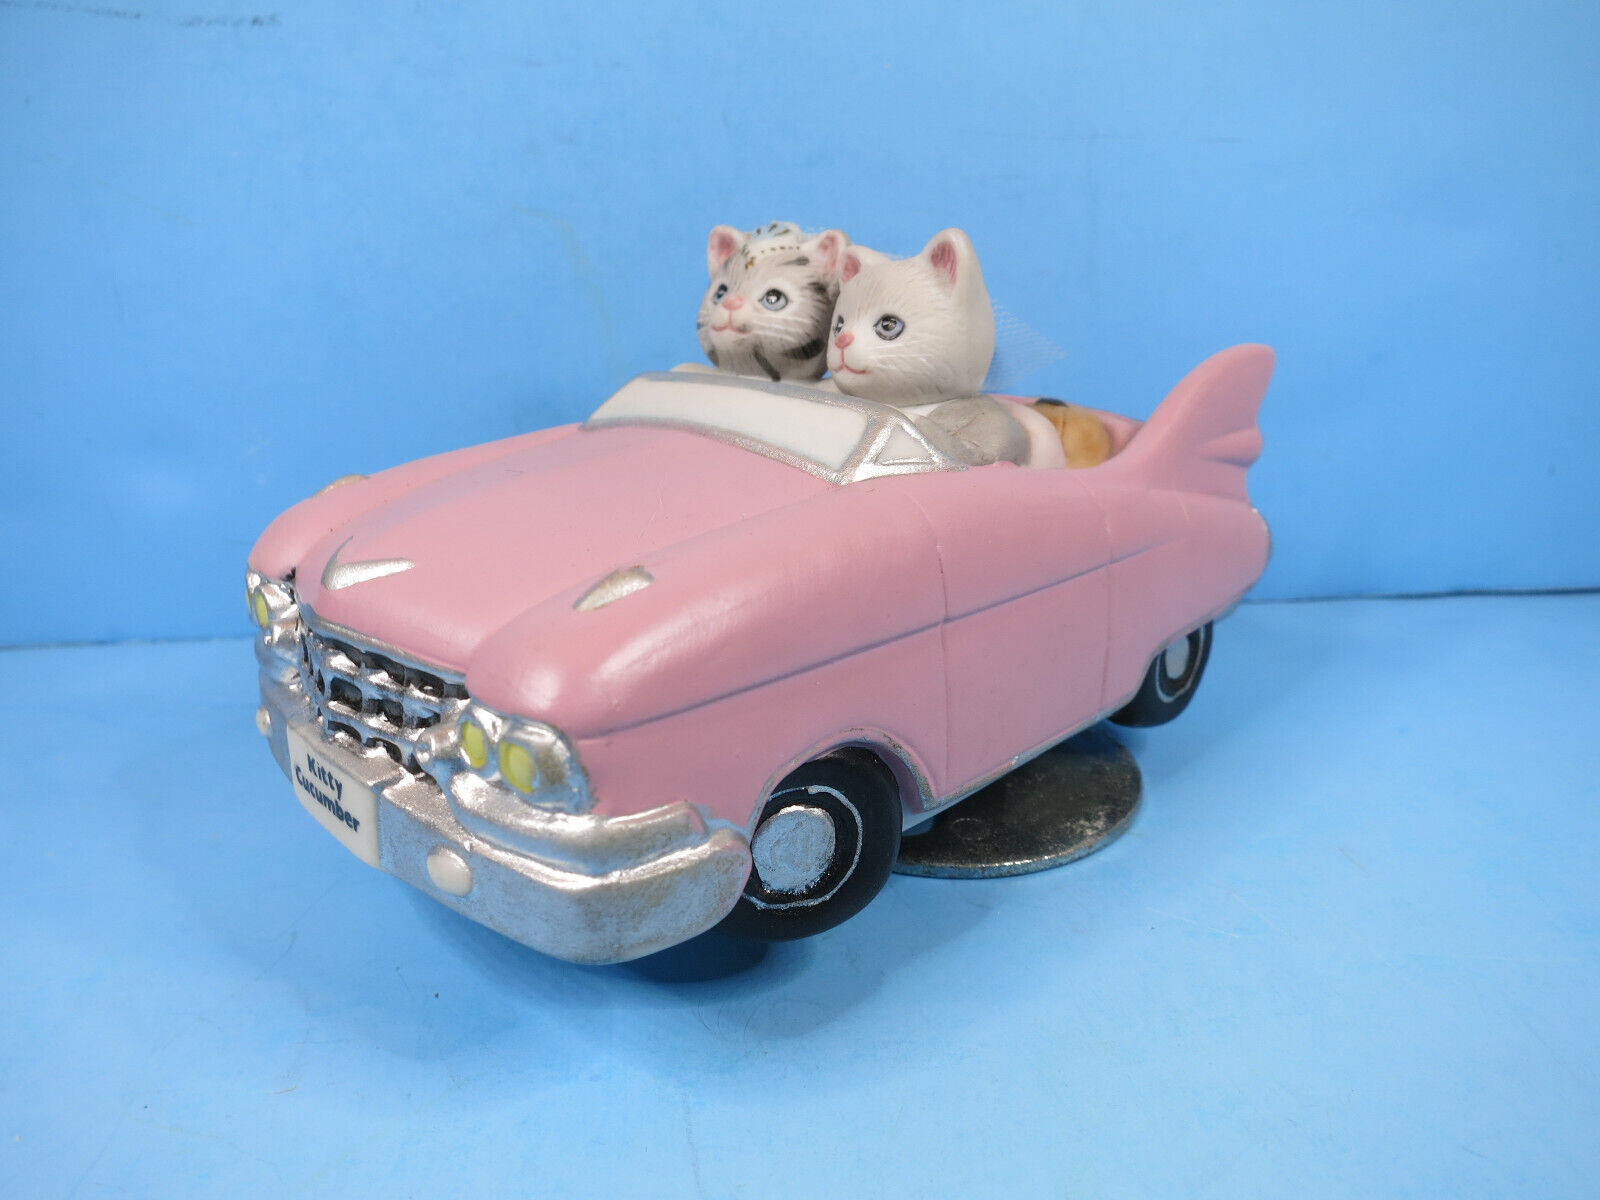 KITTY CUCUMBER-Just Married Pink Cadillac Music Box By Schmid-USED-Good Cond